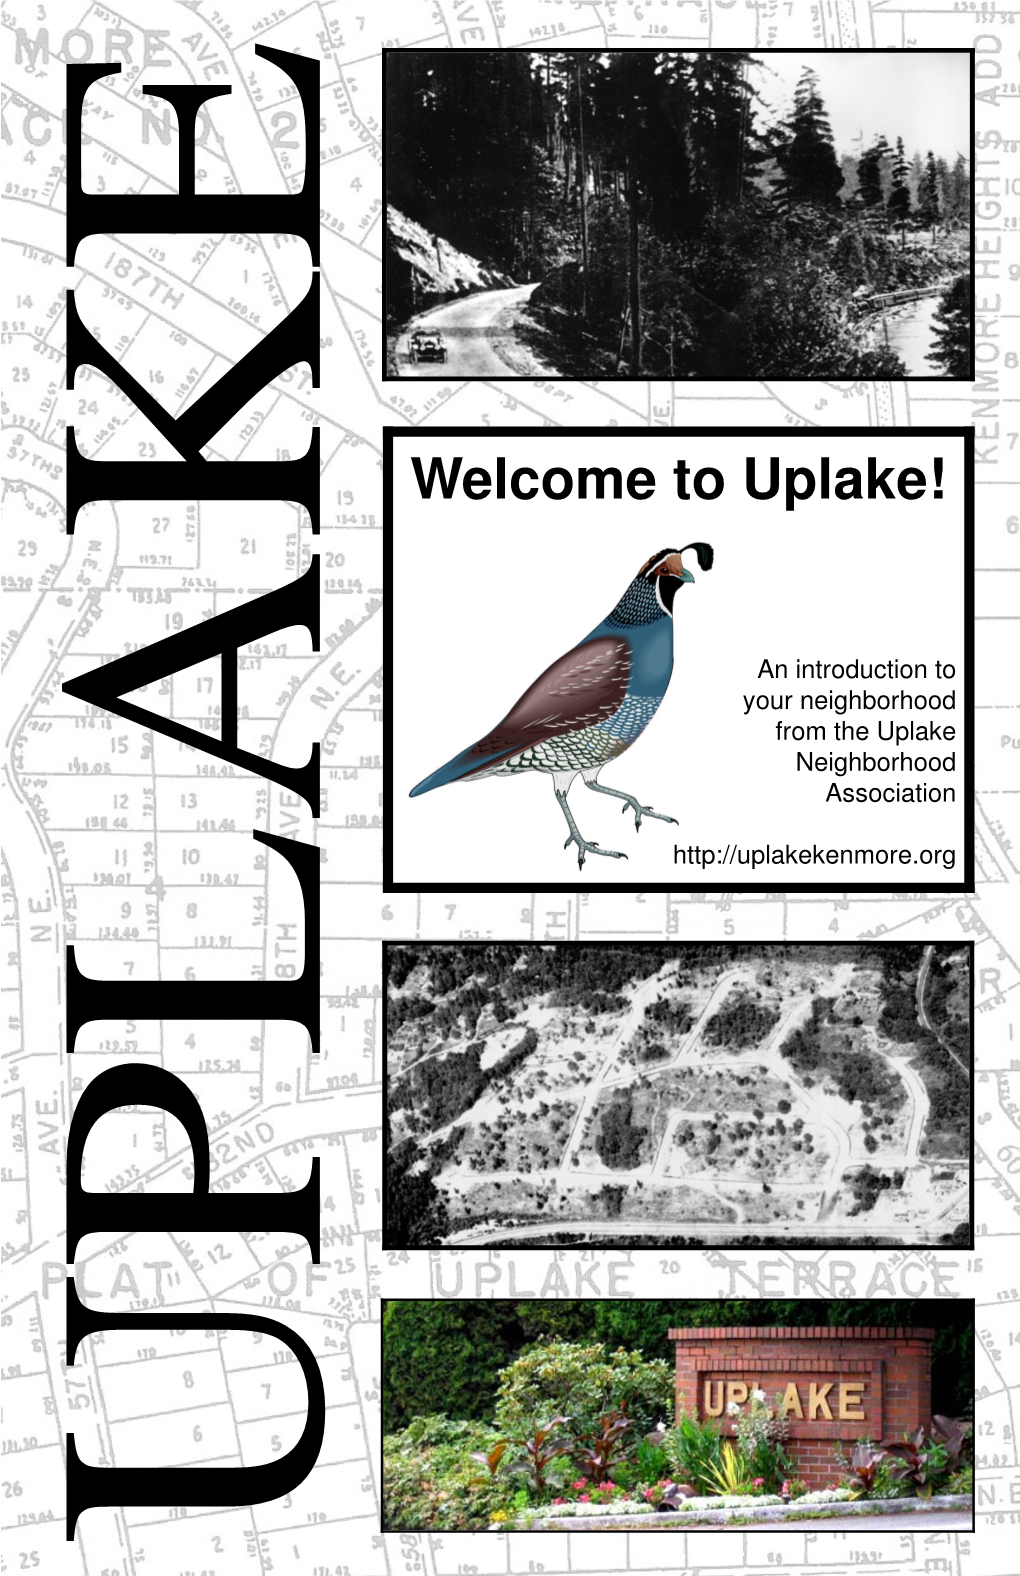 Welcome to Uplake! This Is the Brand New Third Edition of a Get-To-Know-The-Neighborhood Guide, Courtesy of the Uplake Neighborhood Association